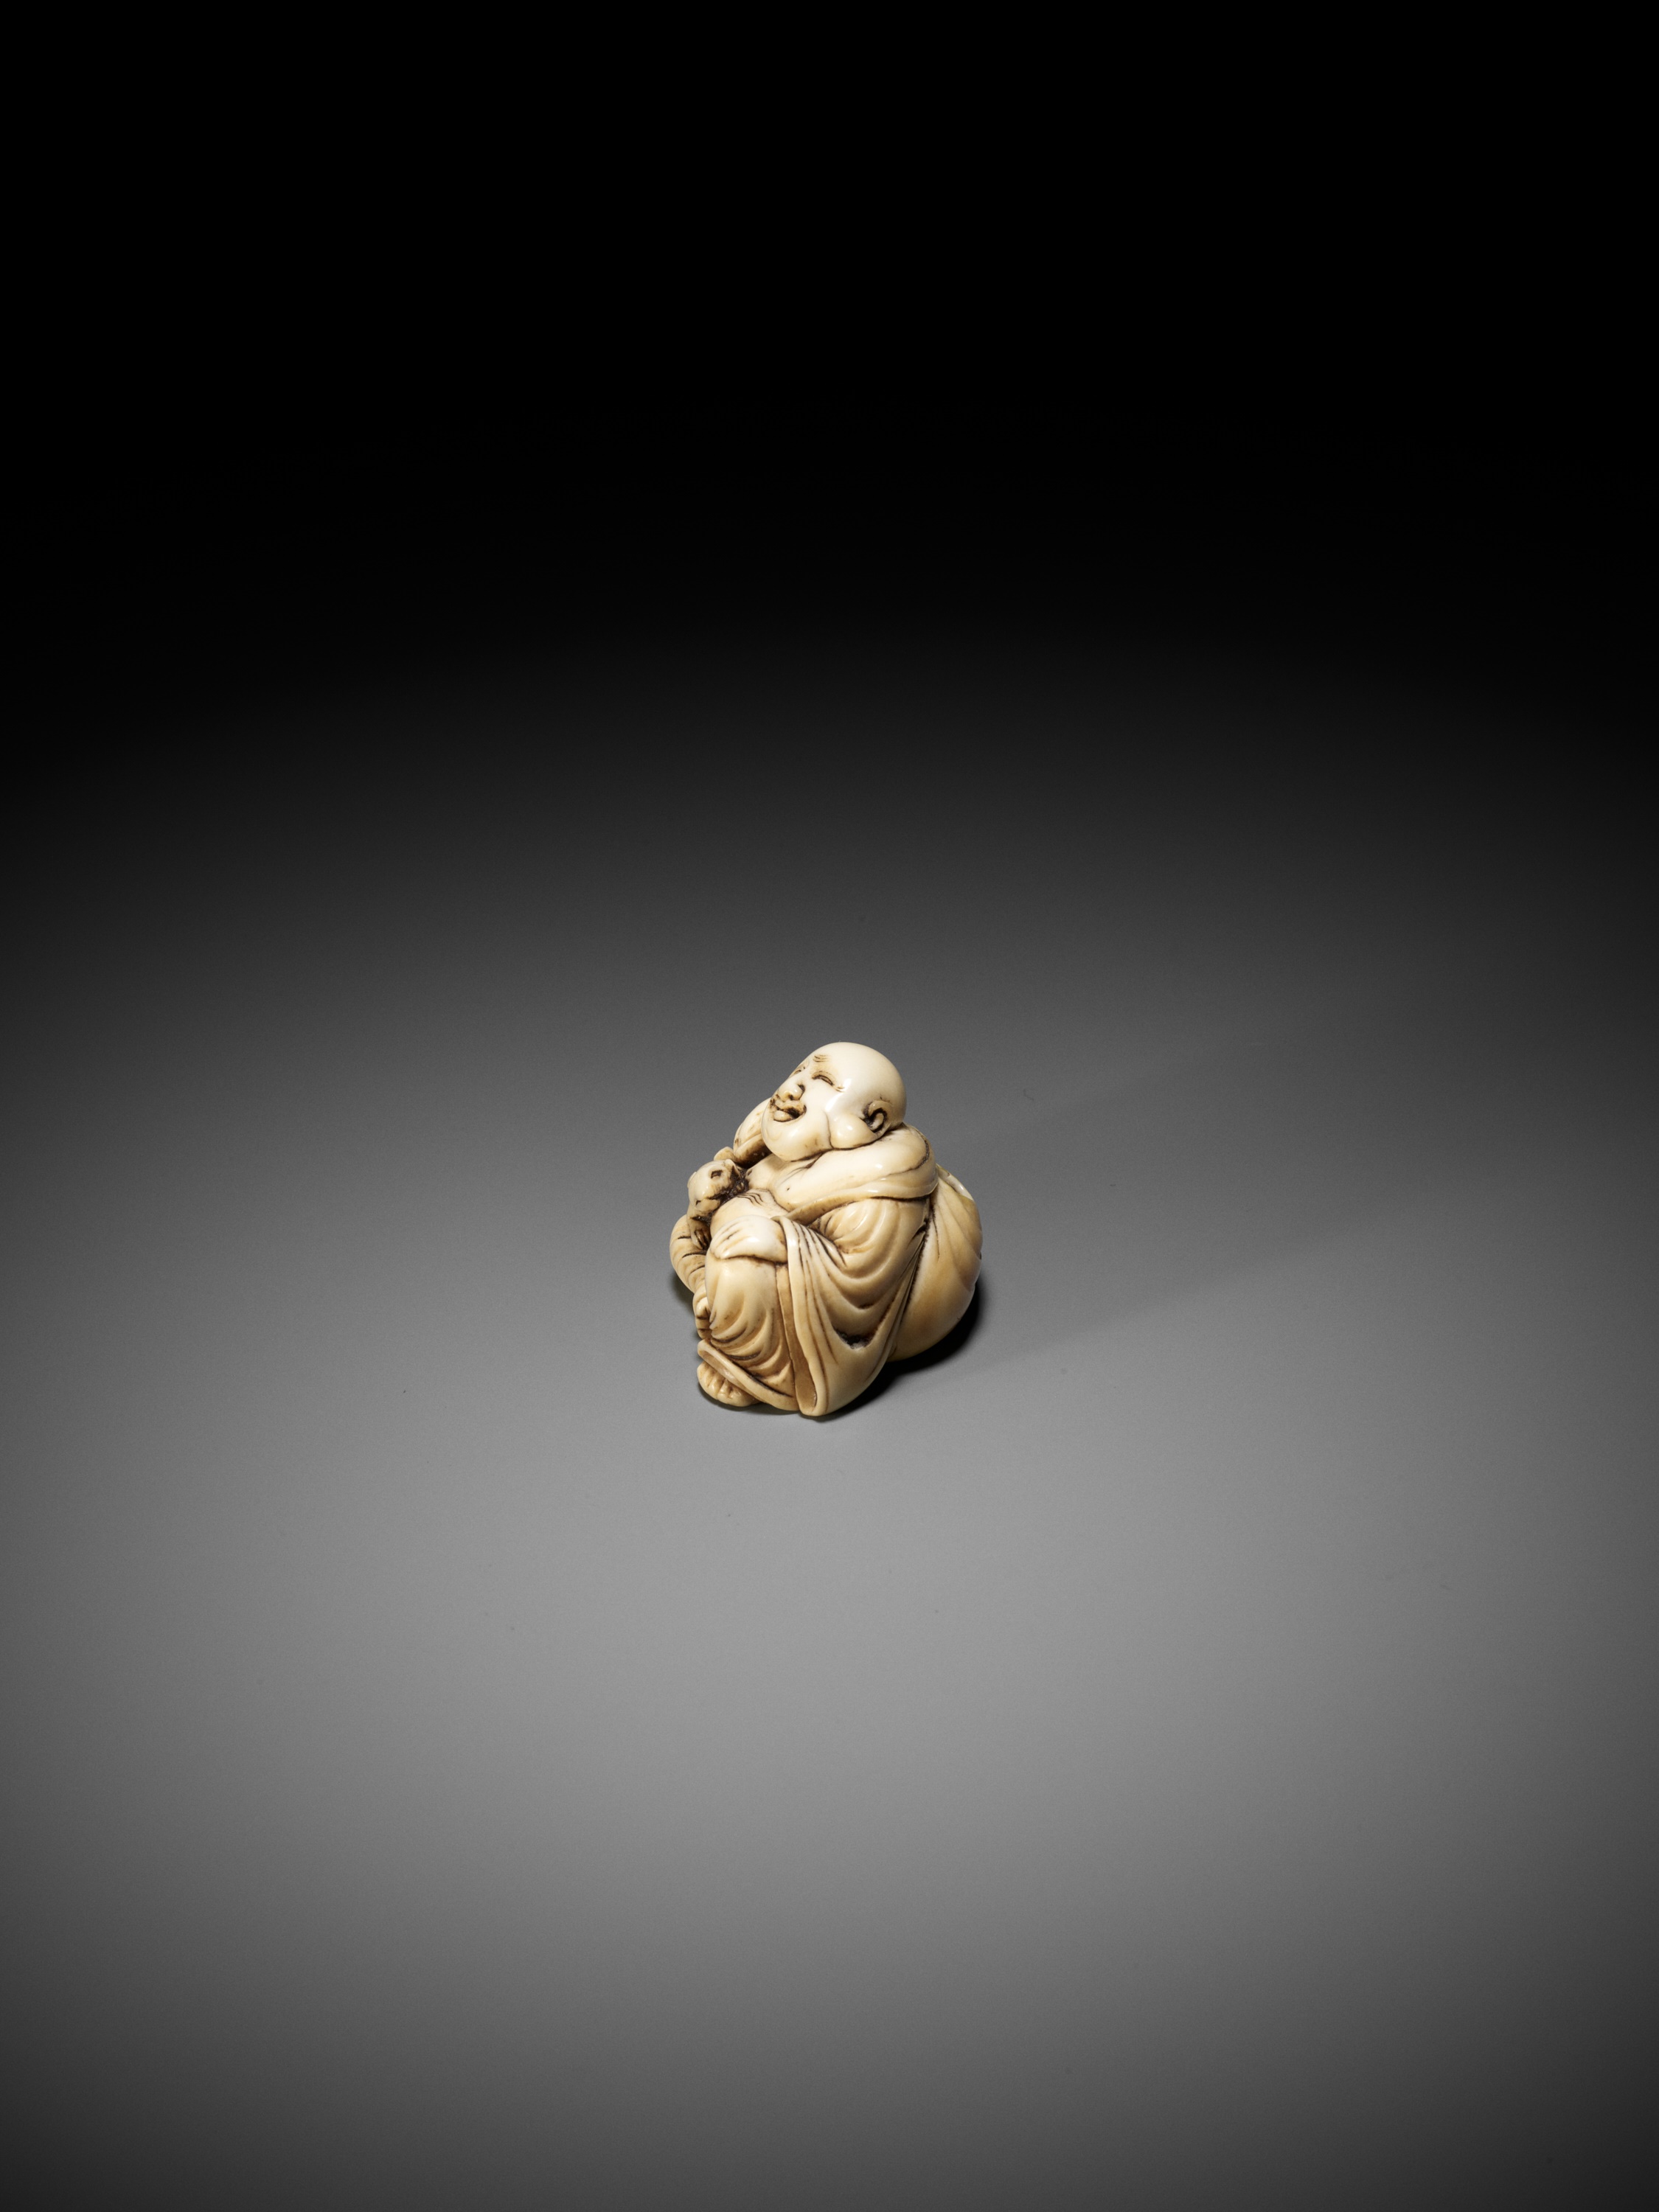 A CHARMING IVORY NETSUKE OF HOTEI WITH PUPPY - Image 5 of 12